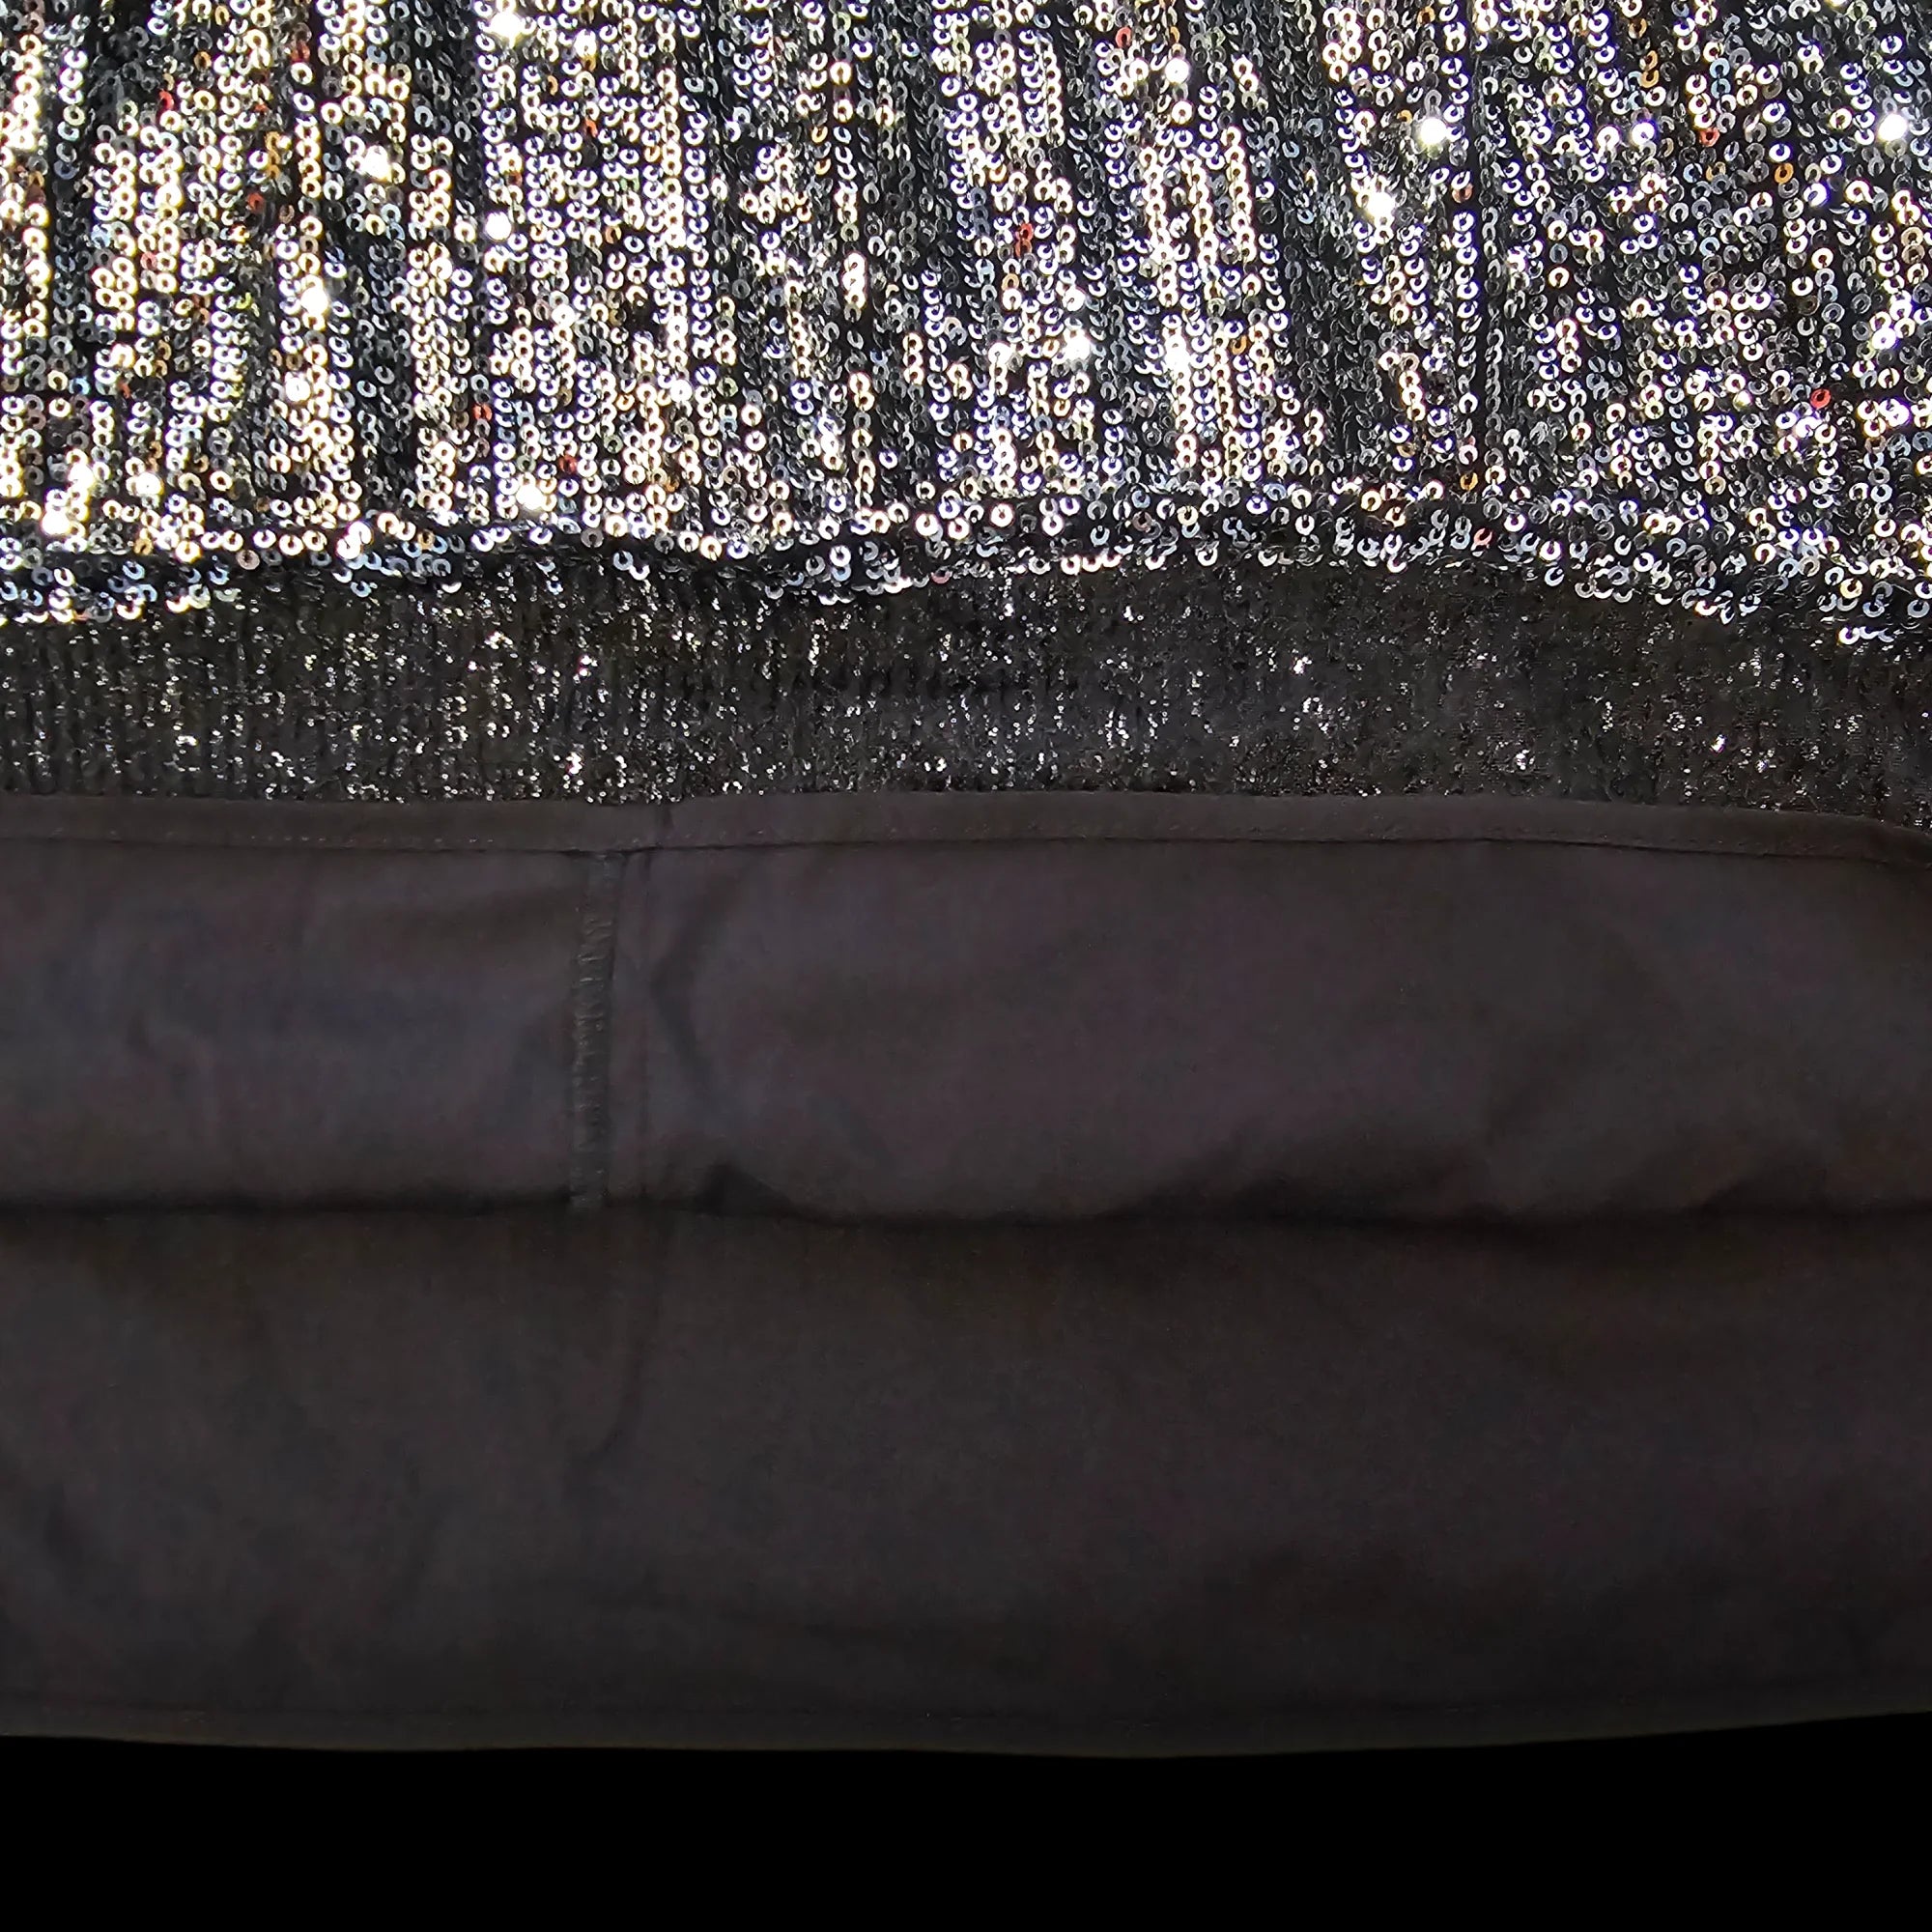 Womens River Island Silver Sequin Fit And Flare Dress UK 14